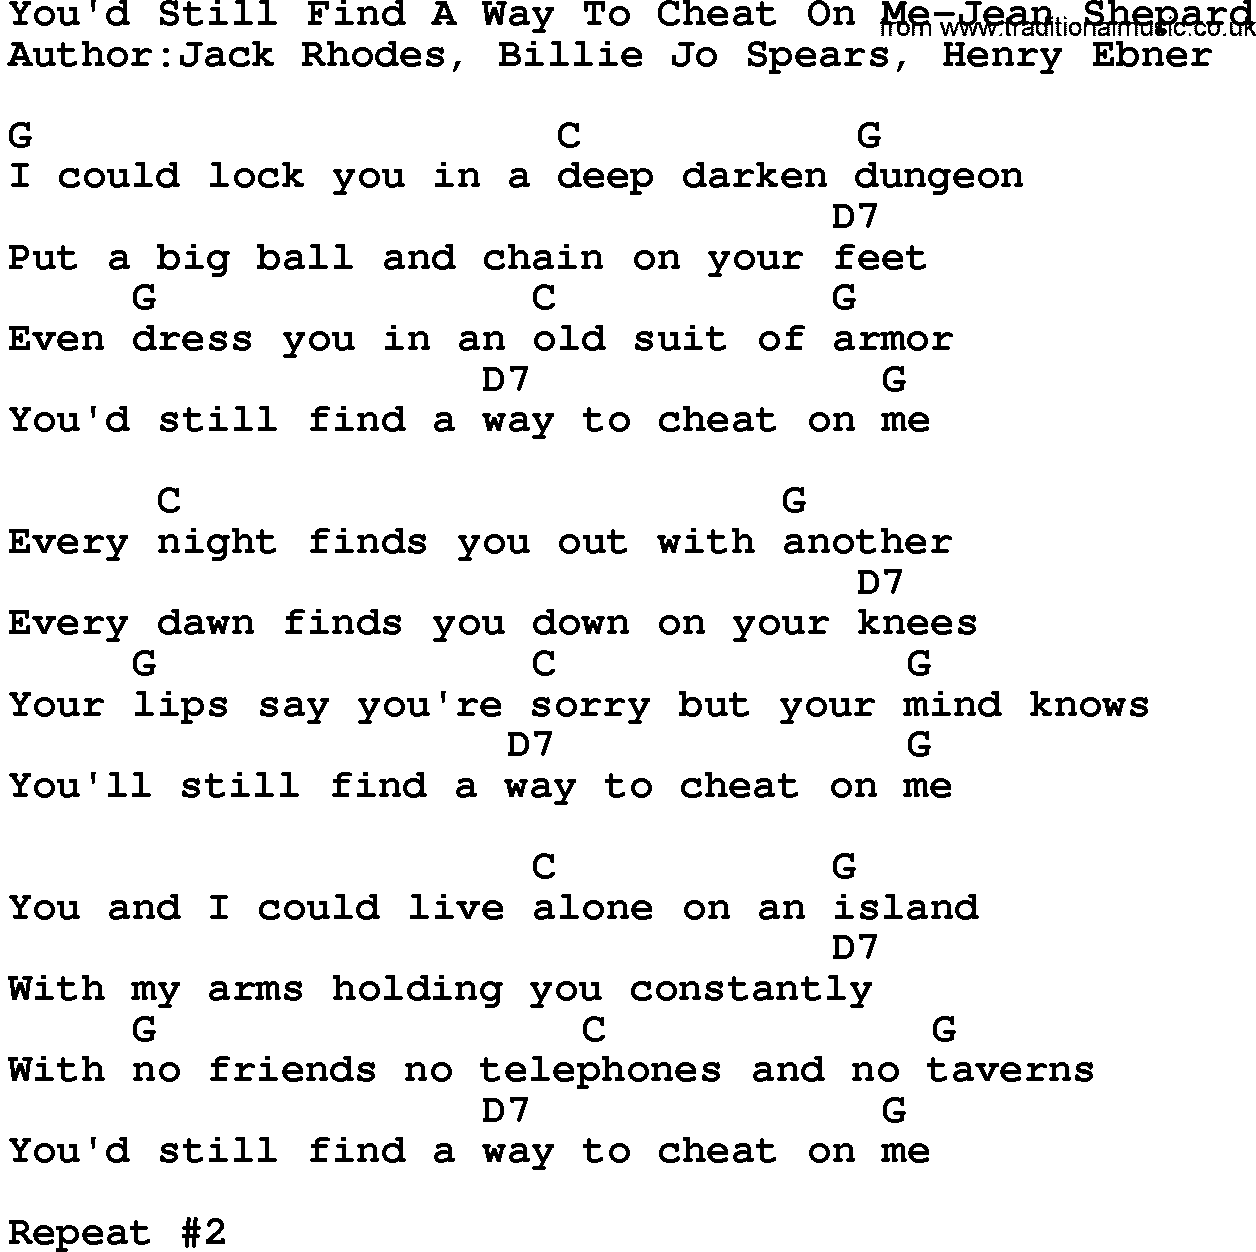 Country music song: You'd Still Find A Way To Cheat On Me-Jean Shepard lyrics and chords